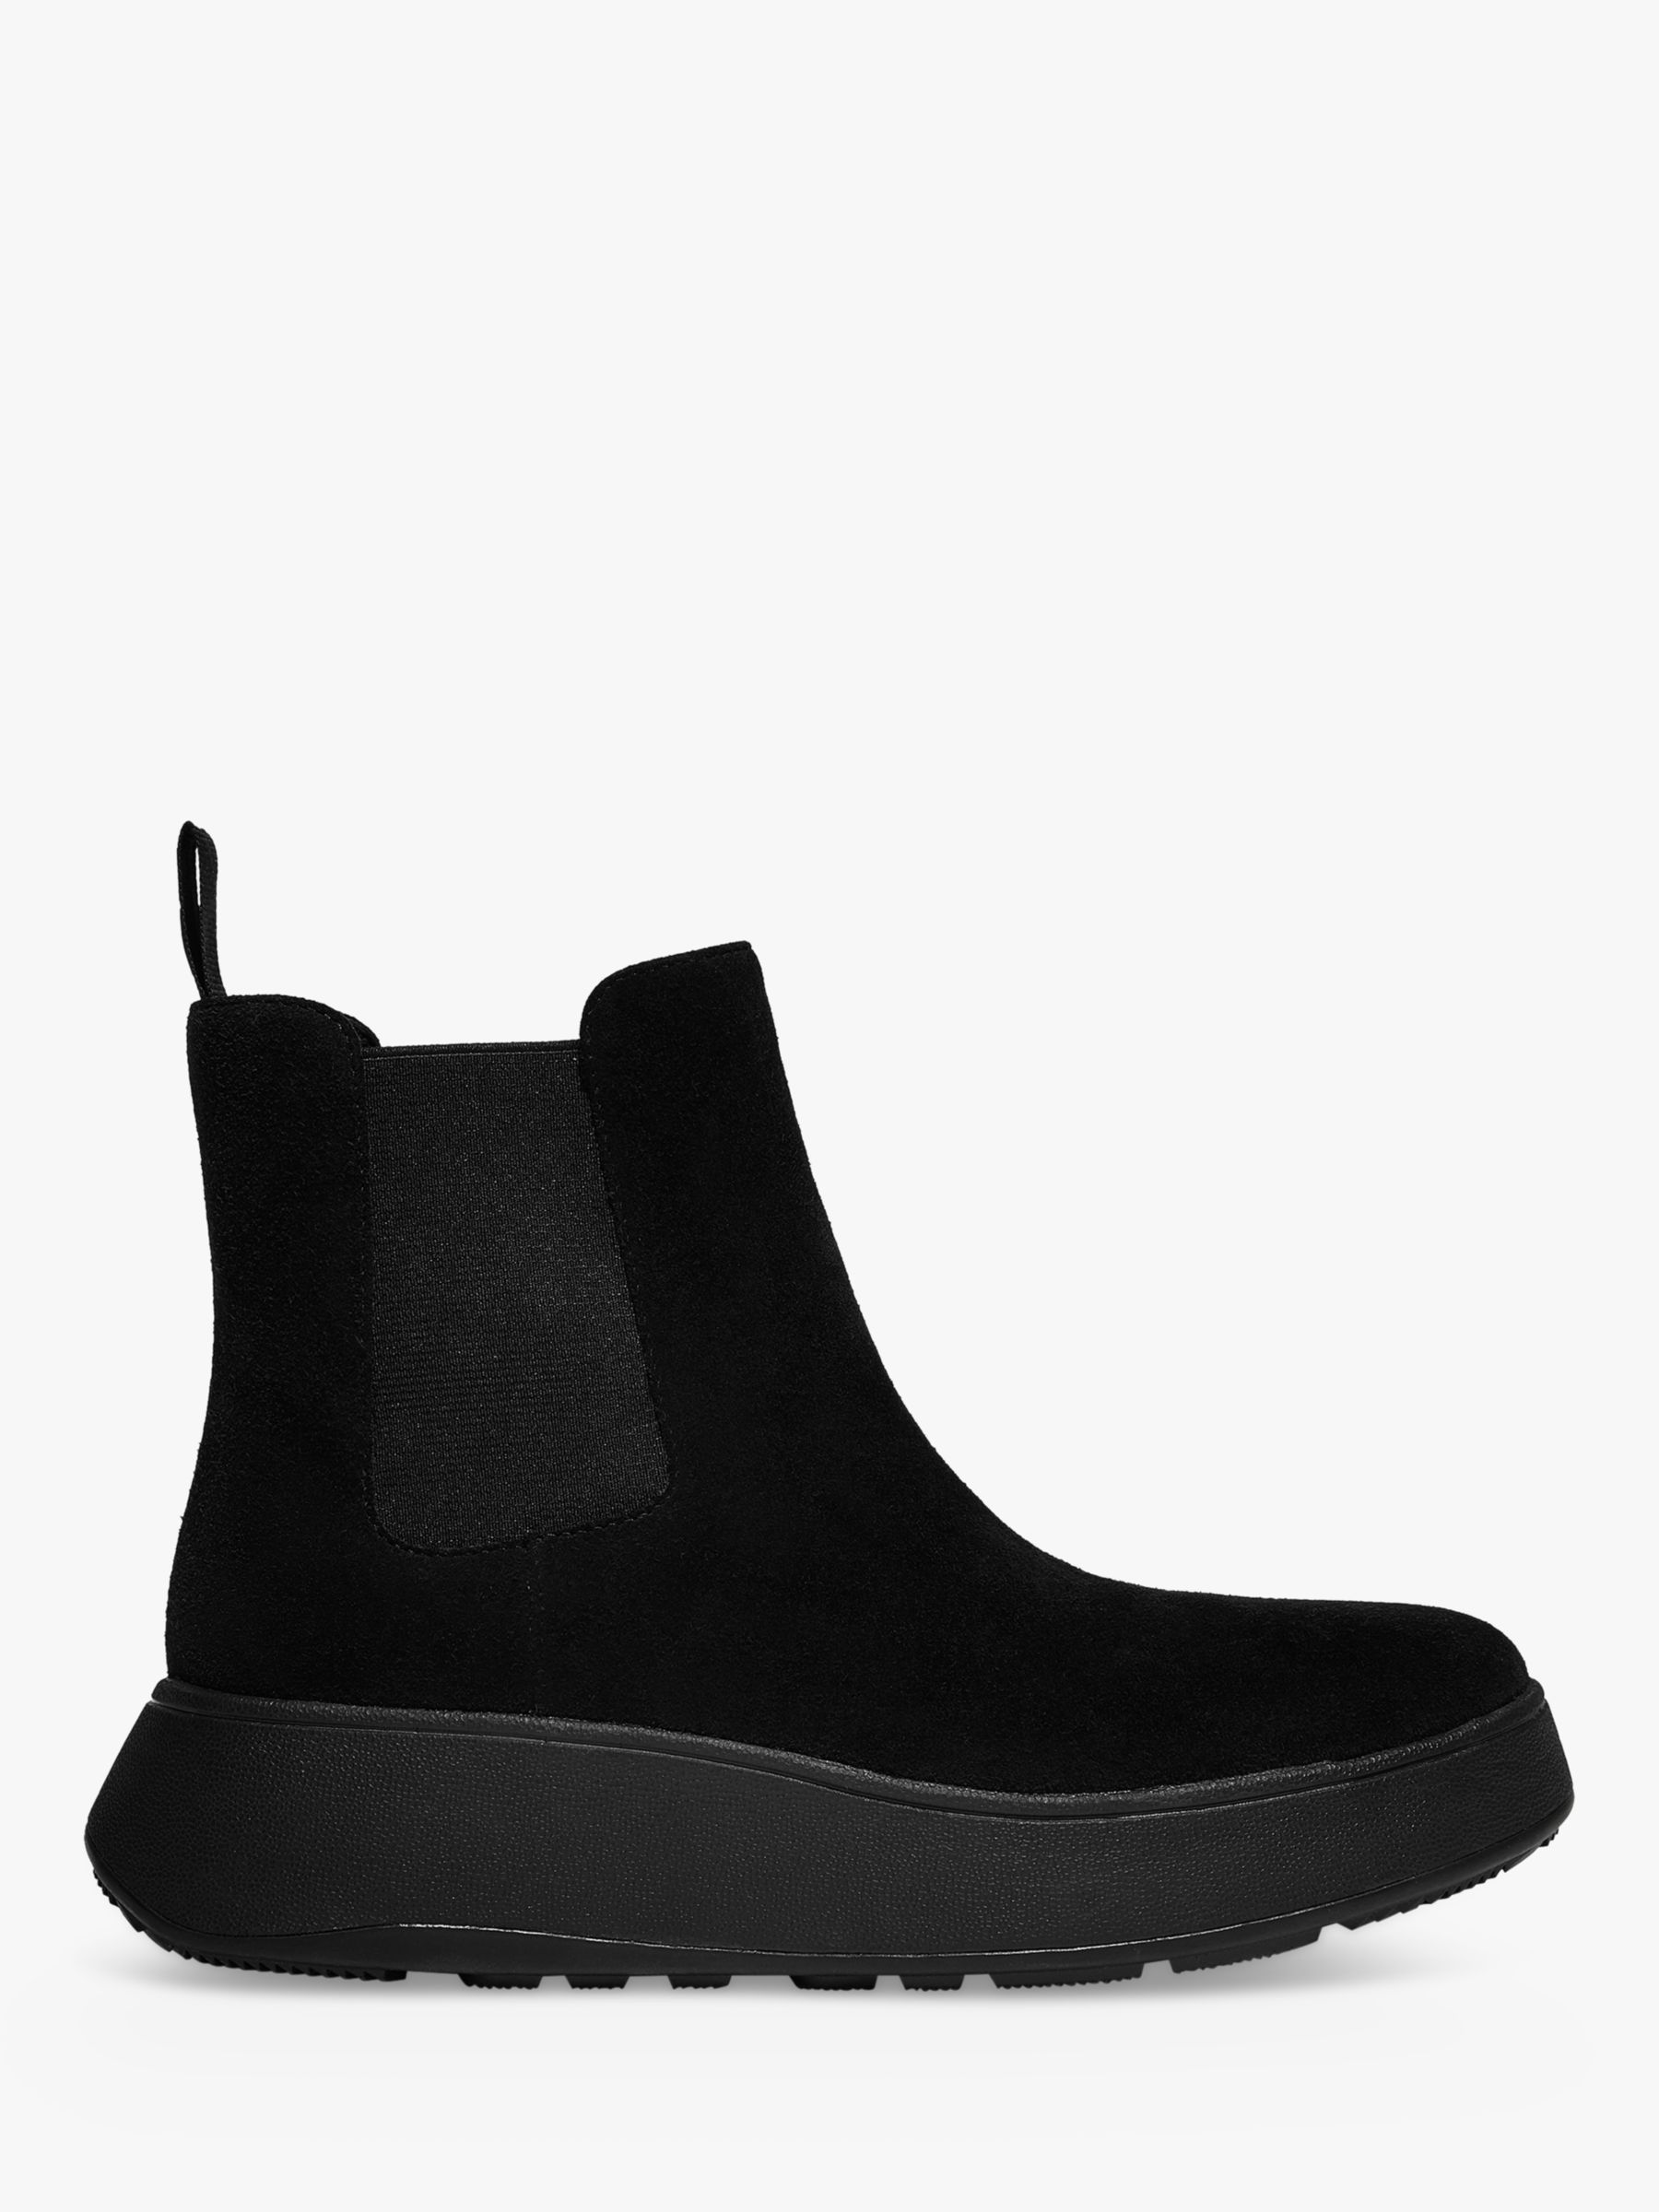 FitFlop Suede Flatform Chelsea Boots, All Black, 3